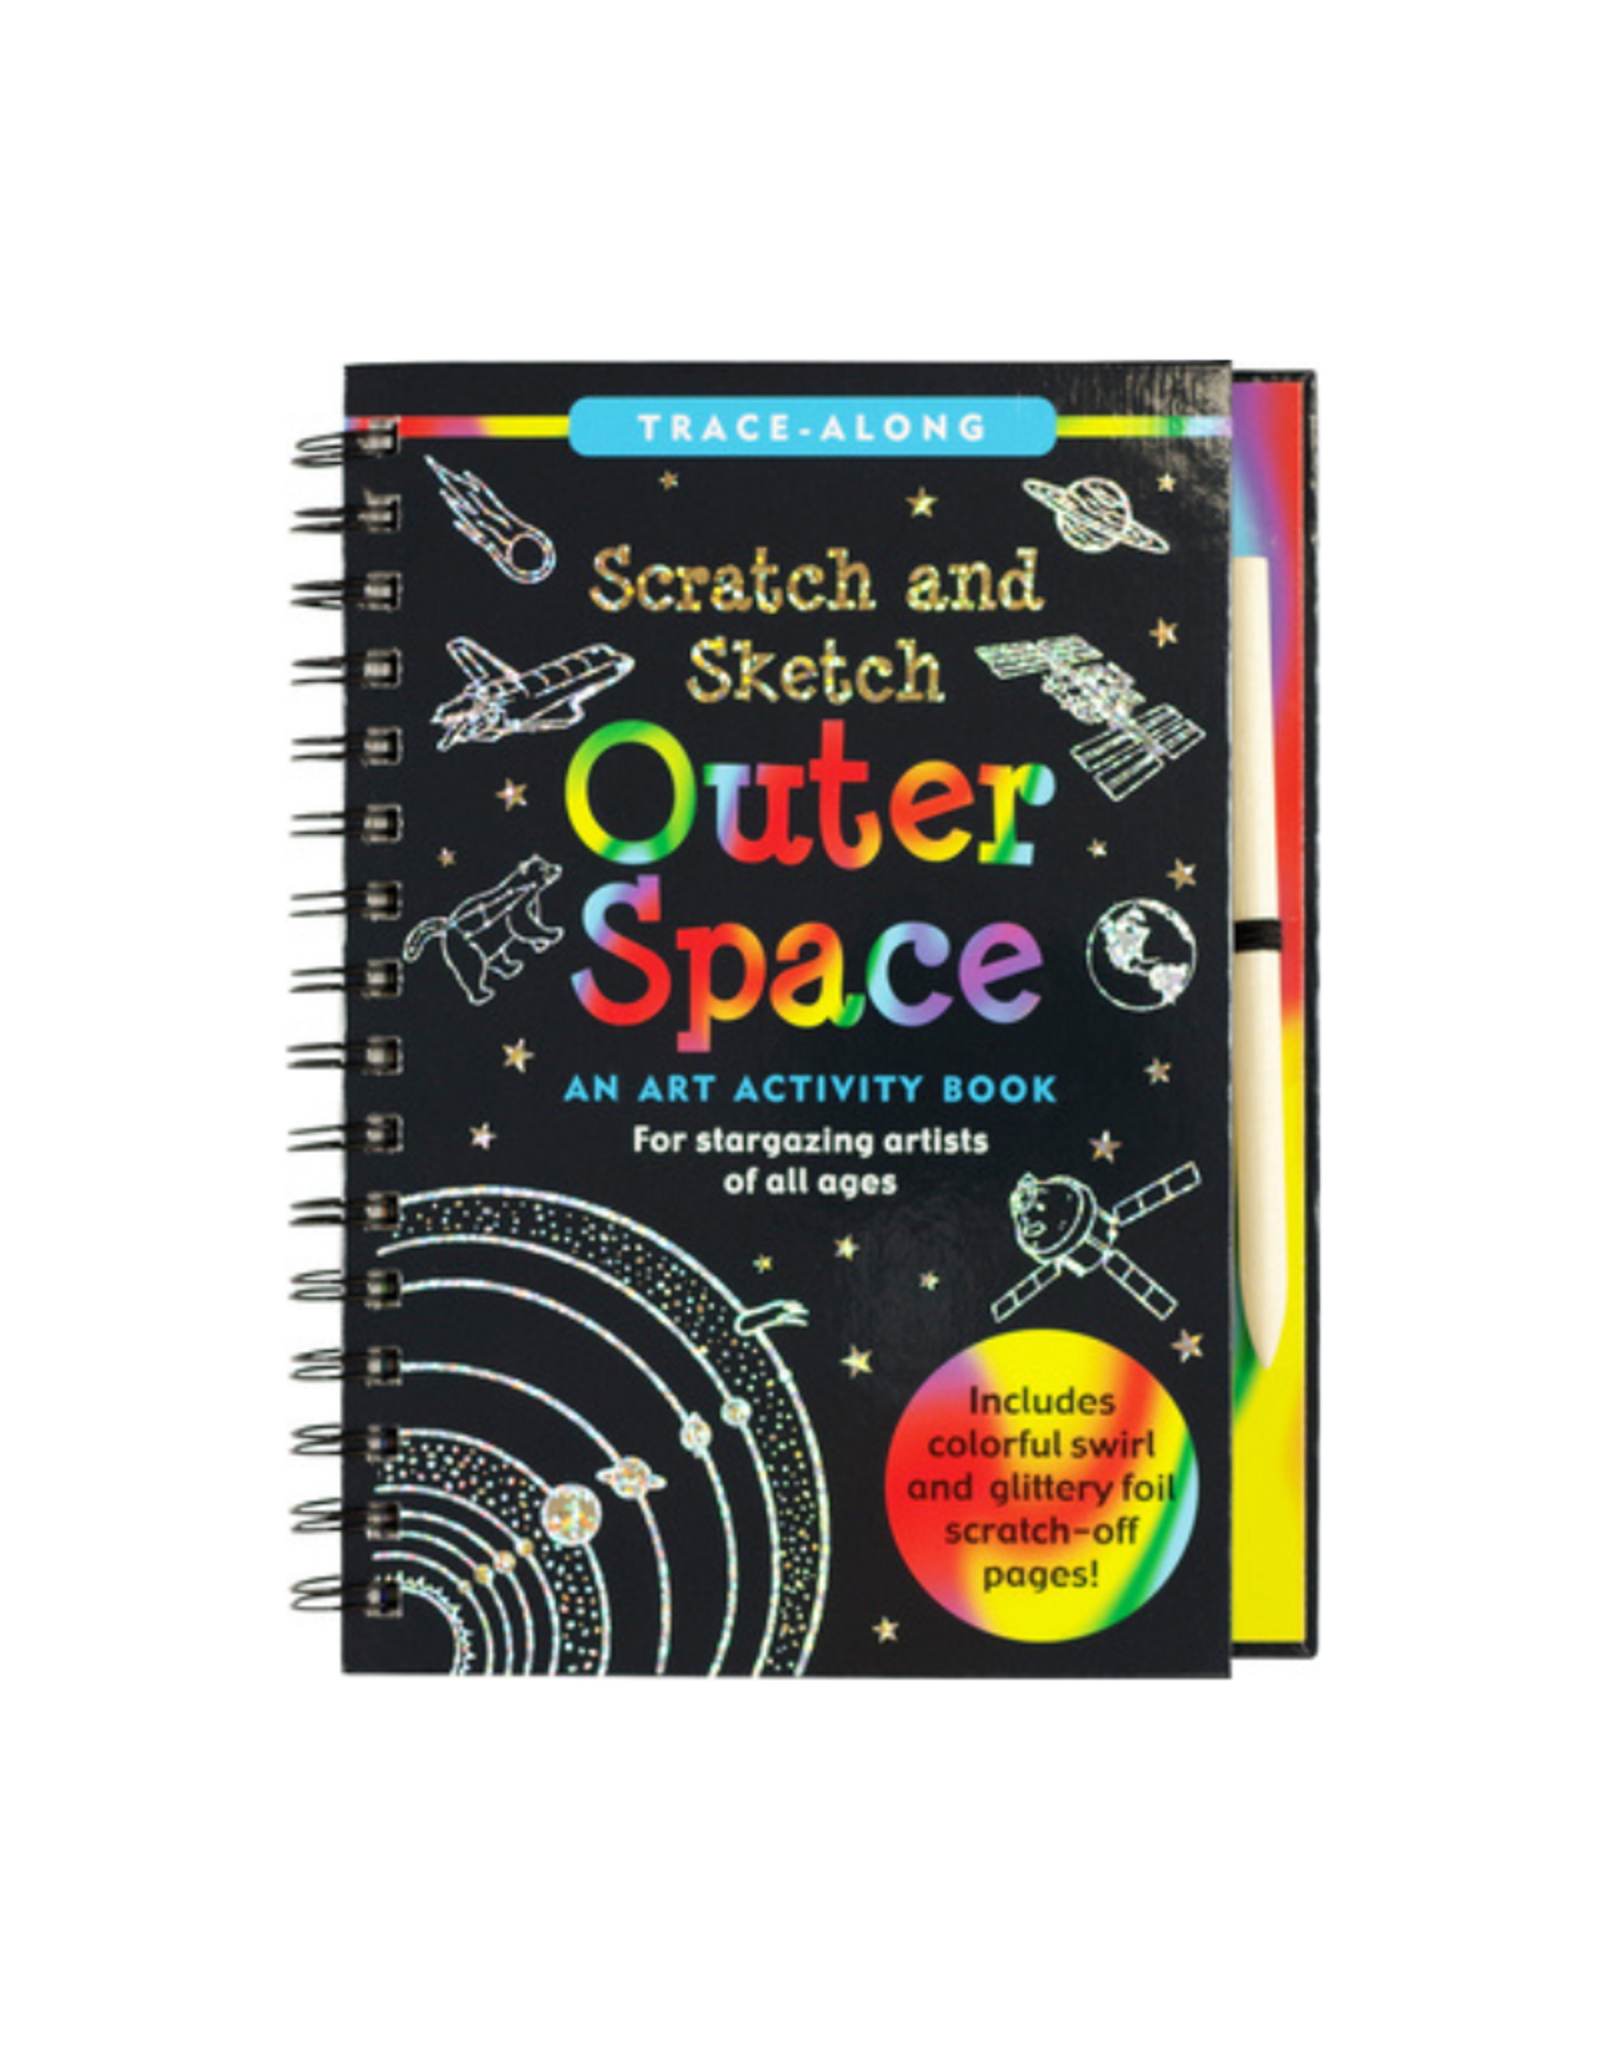 Scratch and Sketch: Outer Space